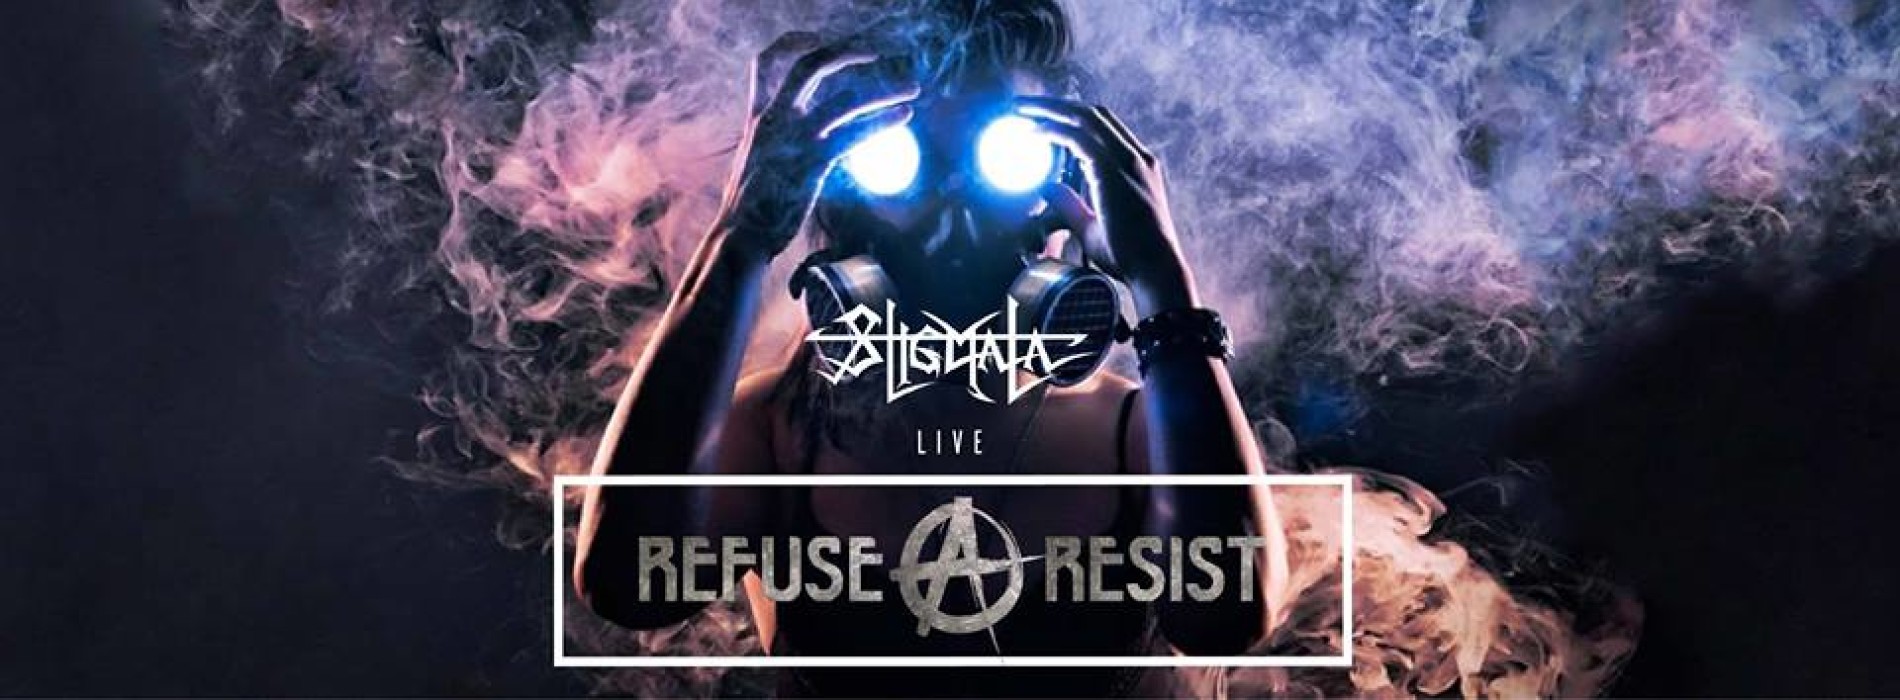 Stigmata Announces Supporting Bands For Refuse / Resist